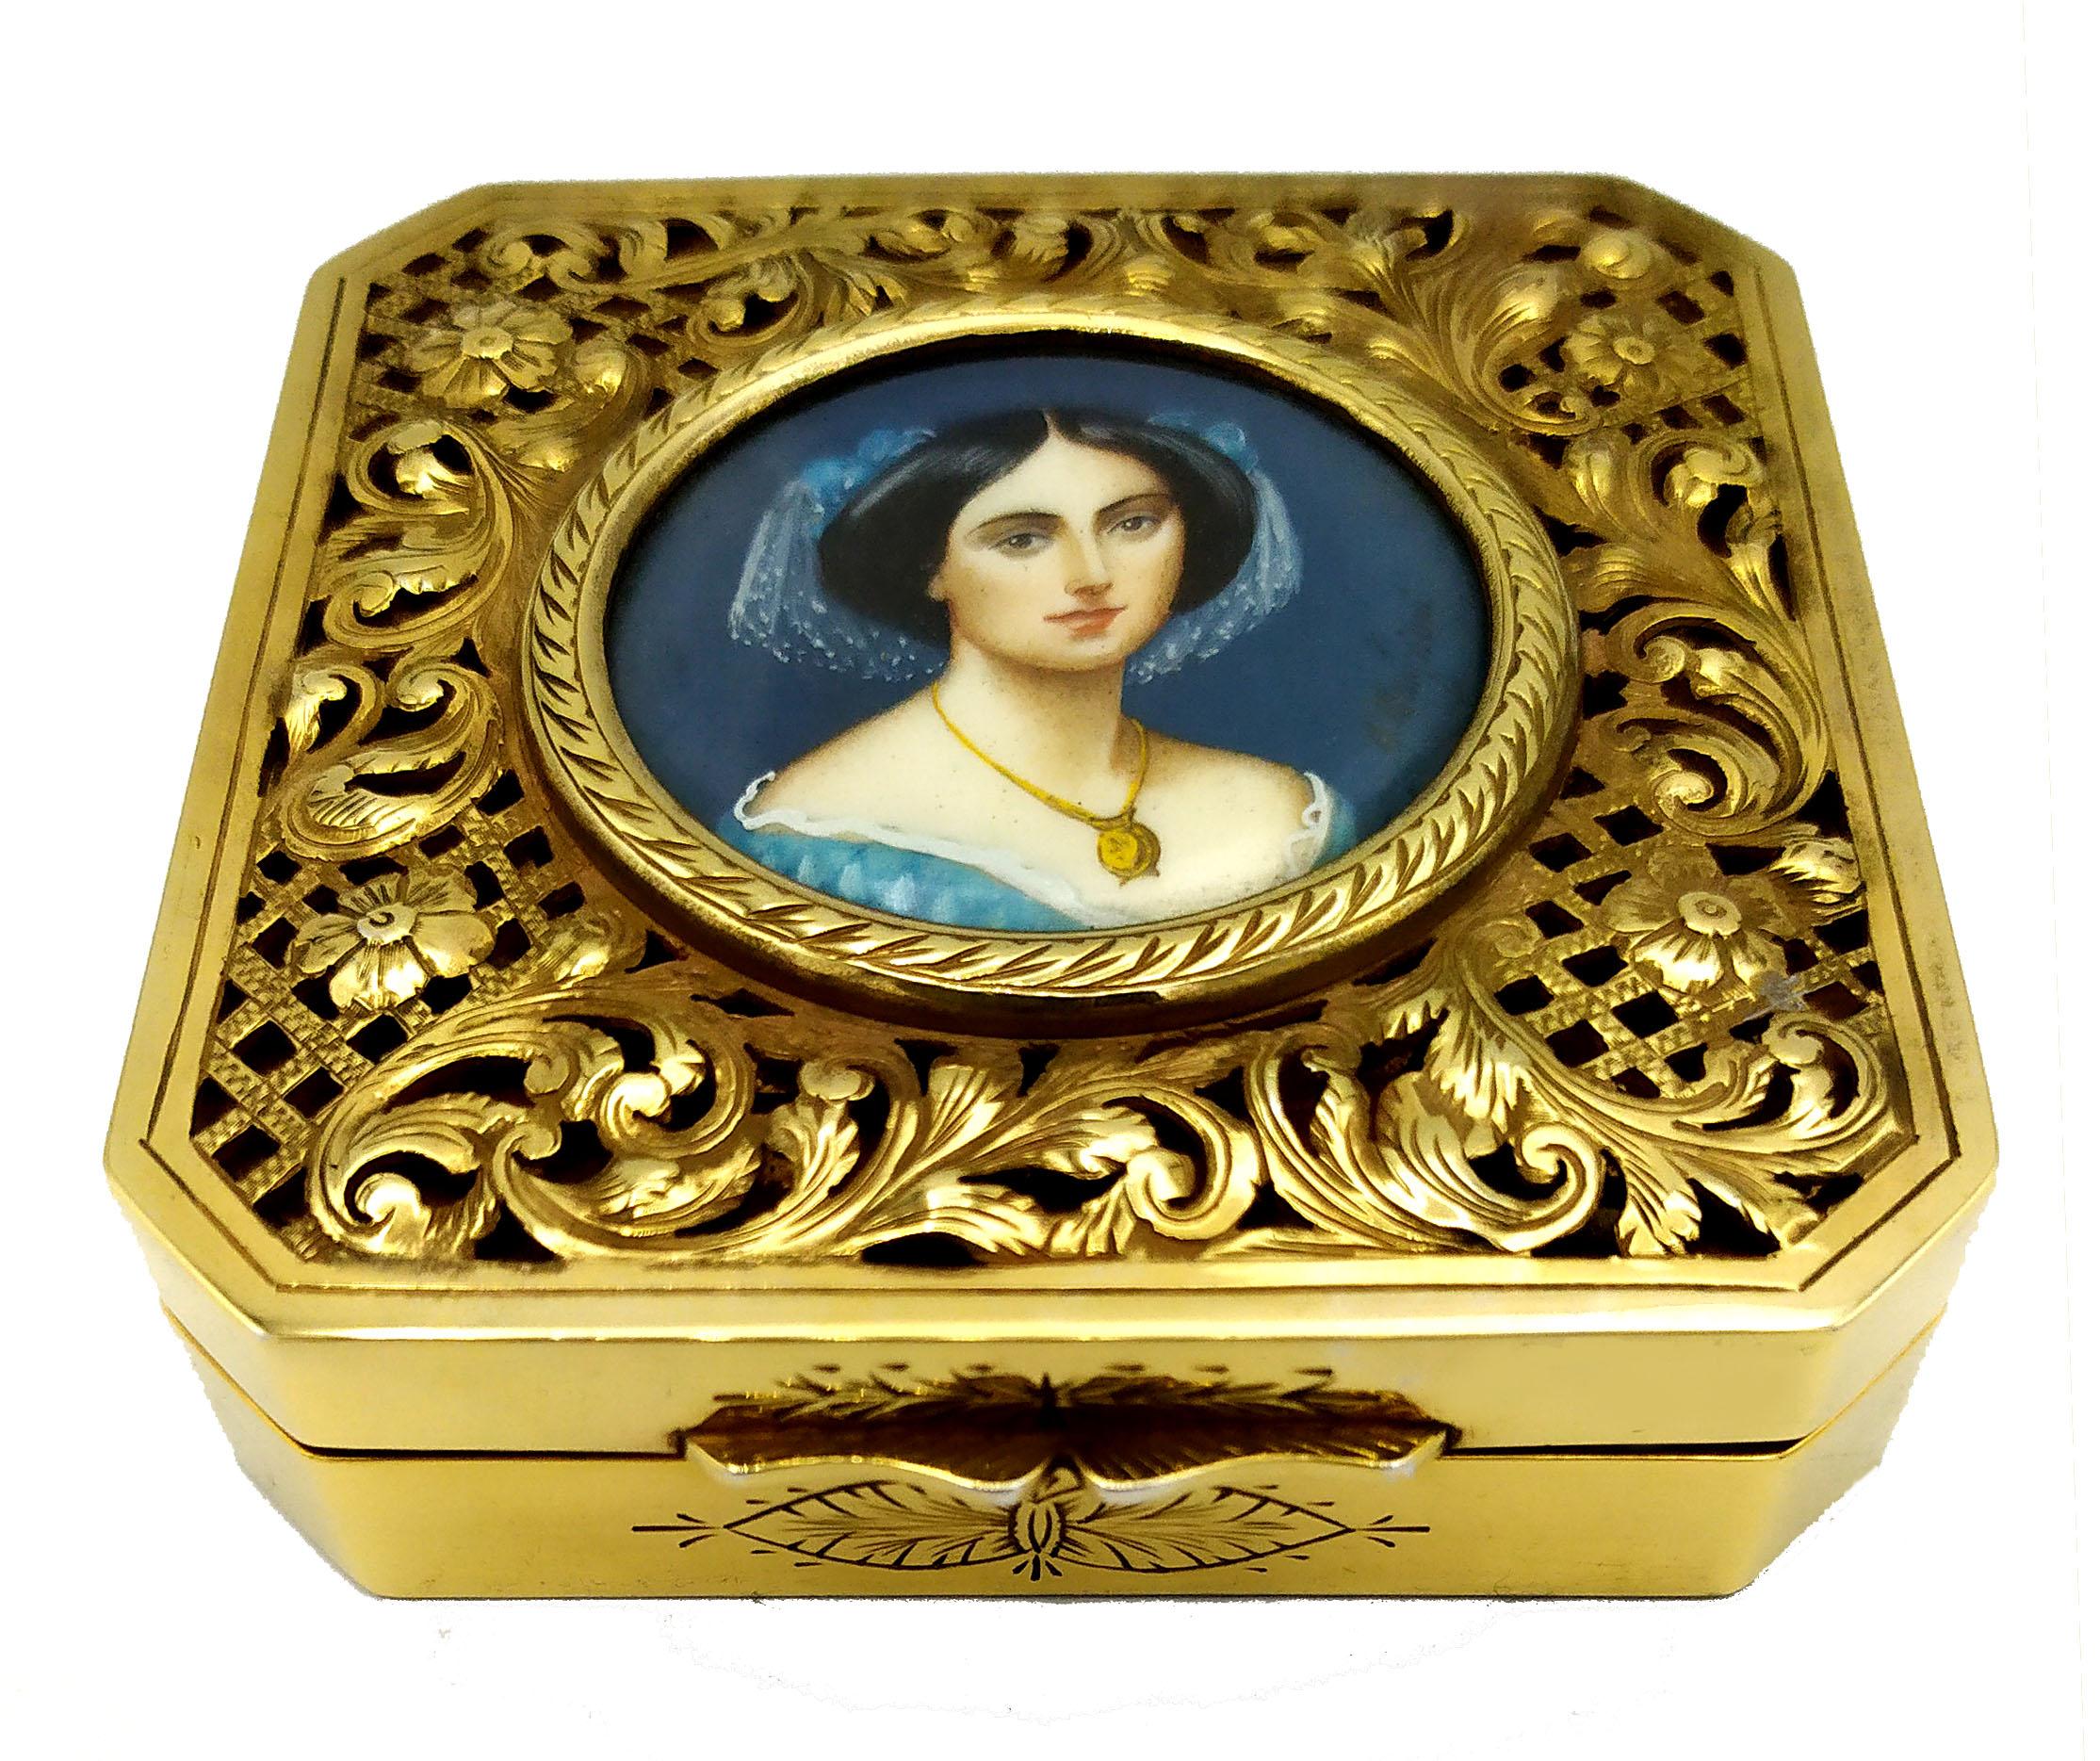 Snuff Box Princess Albert De Broglie is in 925/1000 sterling silver.
Snuff Box Princess Albert De Broglie has openwork lid, and handpainted fine round miniature diameter cm. 4 hand painted in tempera on vegetal ivory by the painter Anna Maria